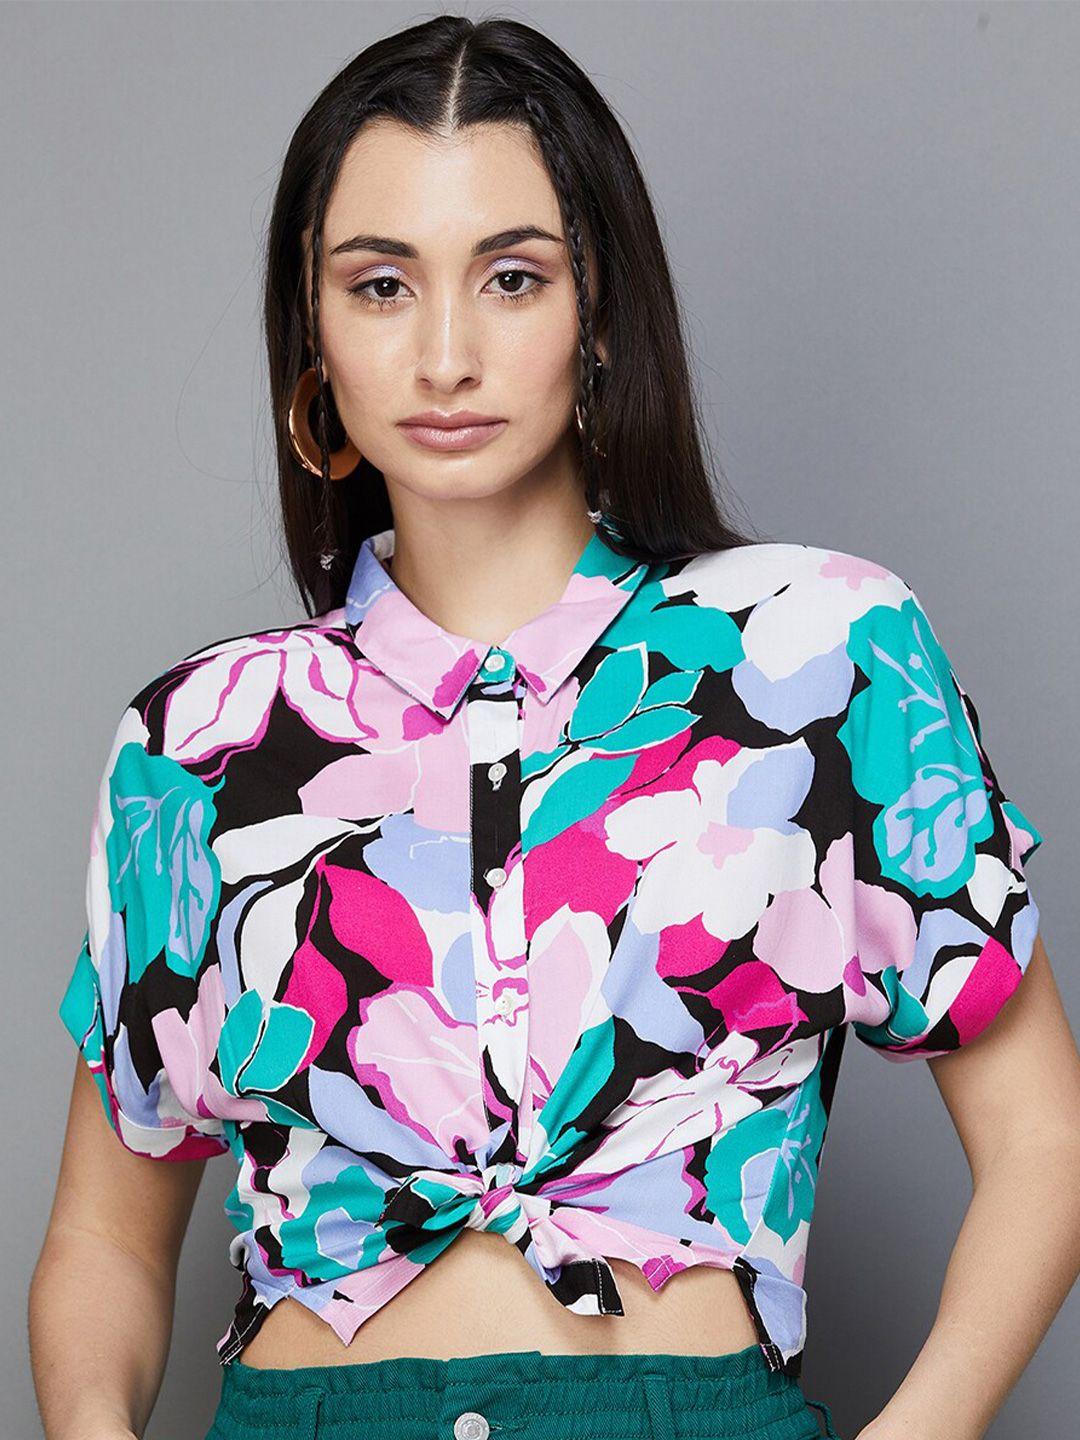 ginger-by-lifestyle-floral-printed-extended-sleeve-shirt-style-crop-top